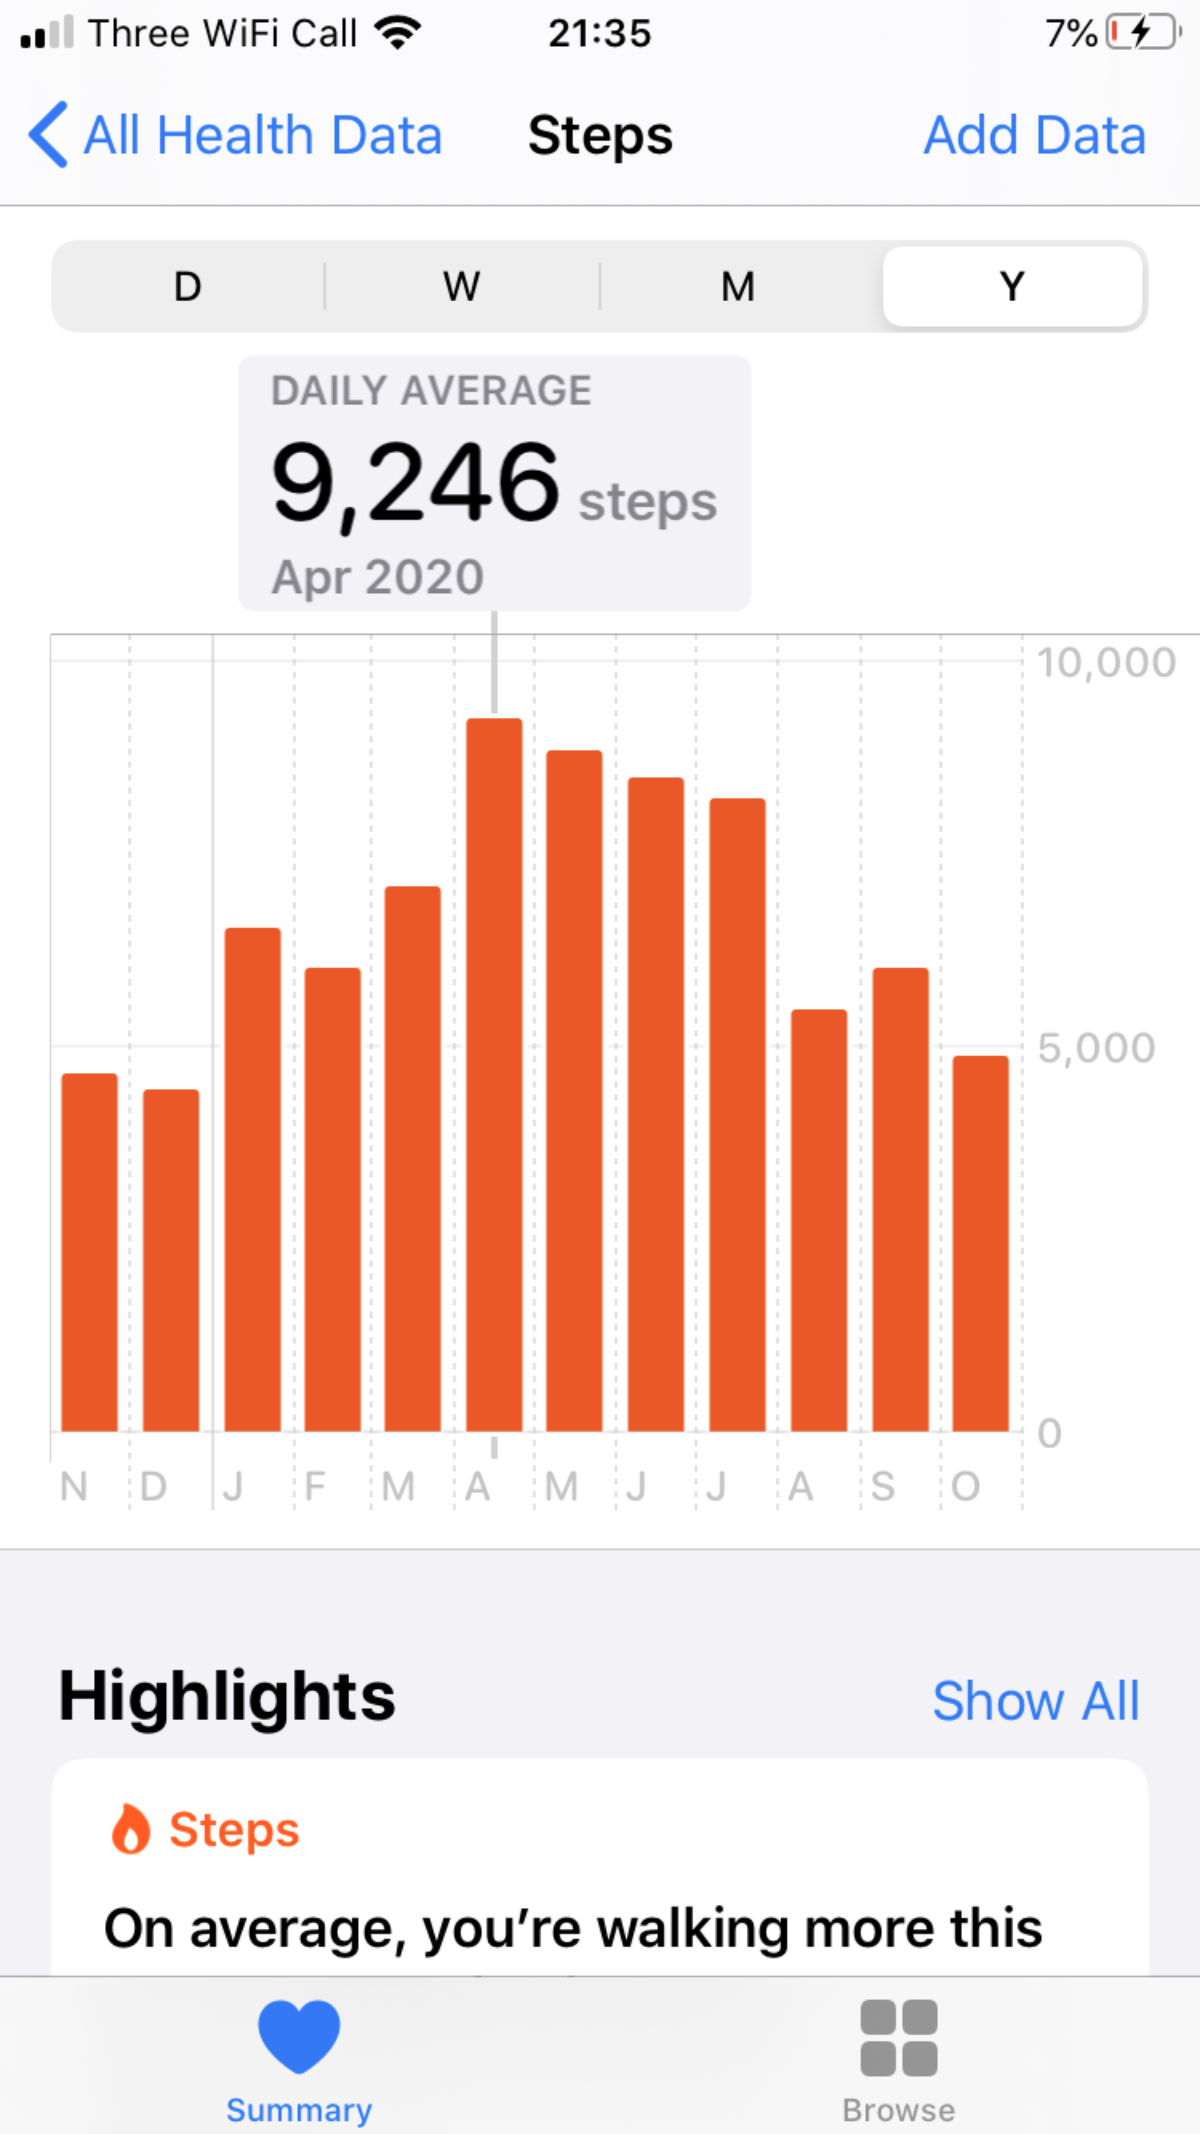 3000 steps equals how many calories